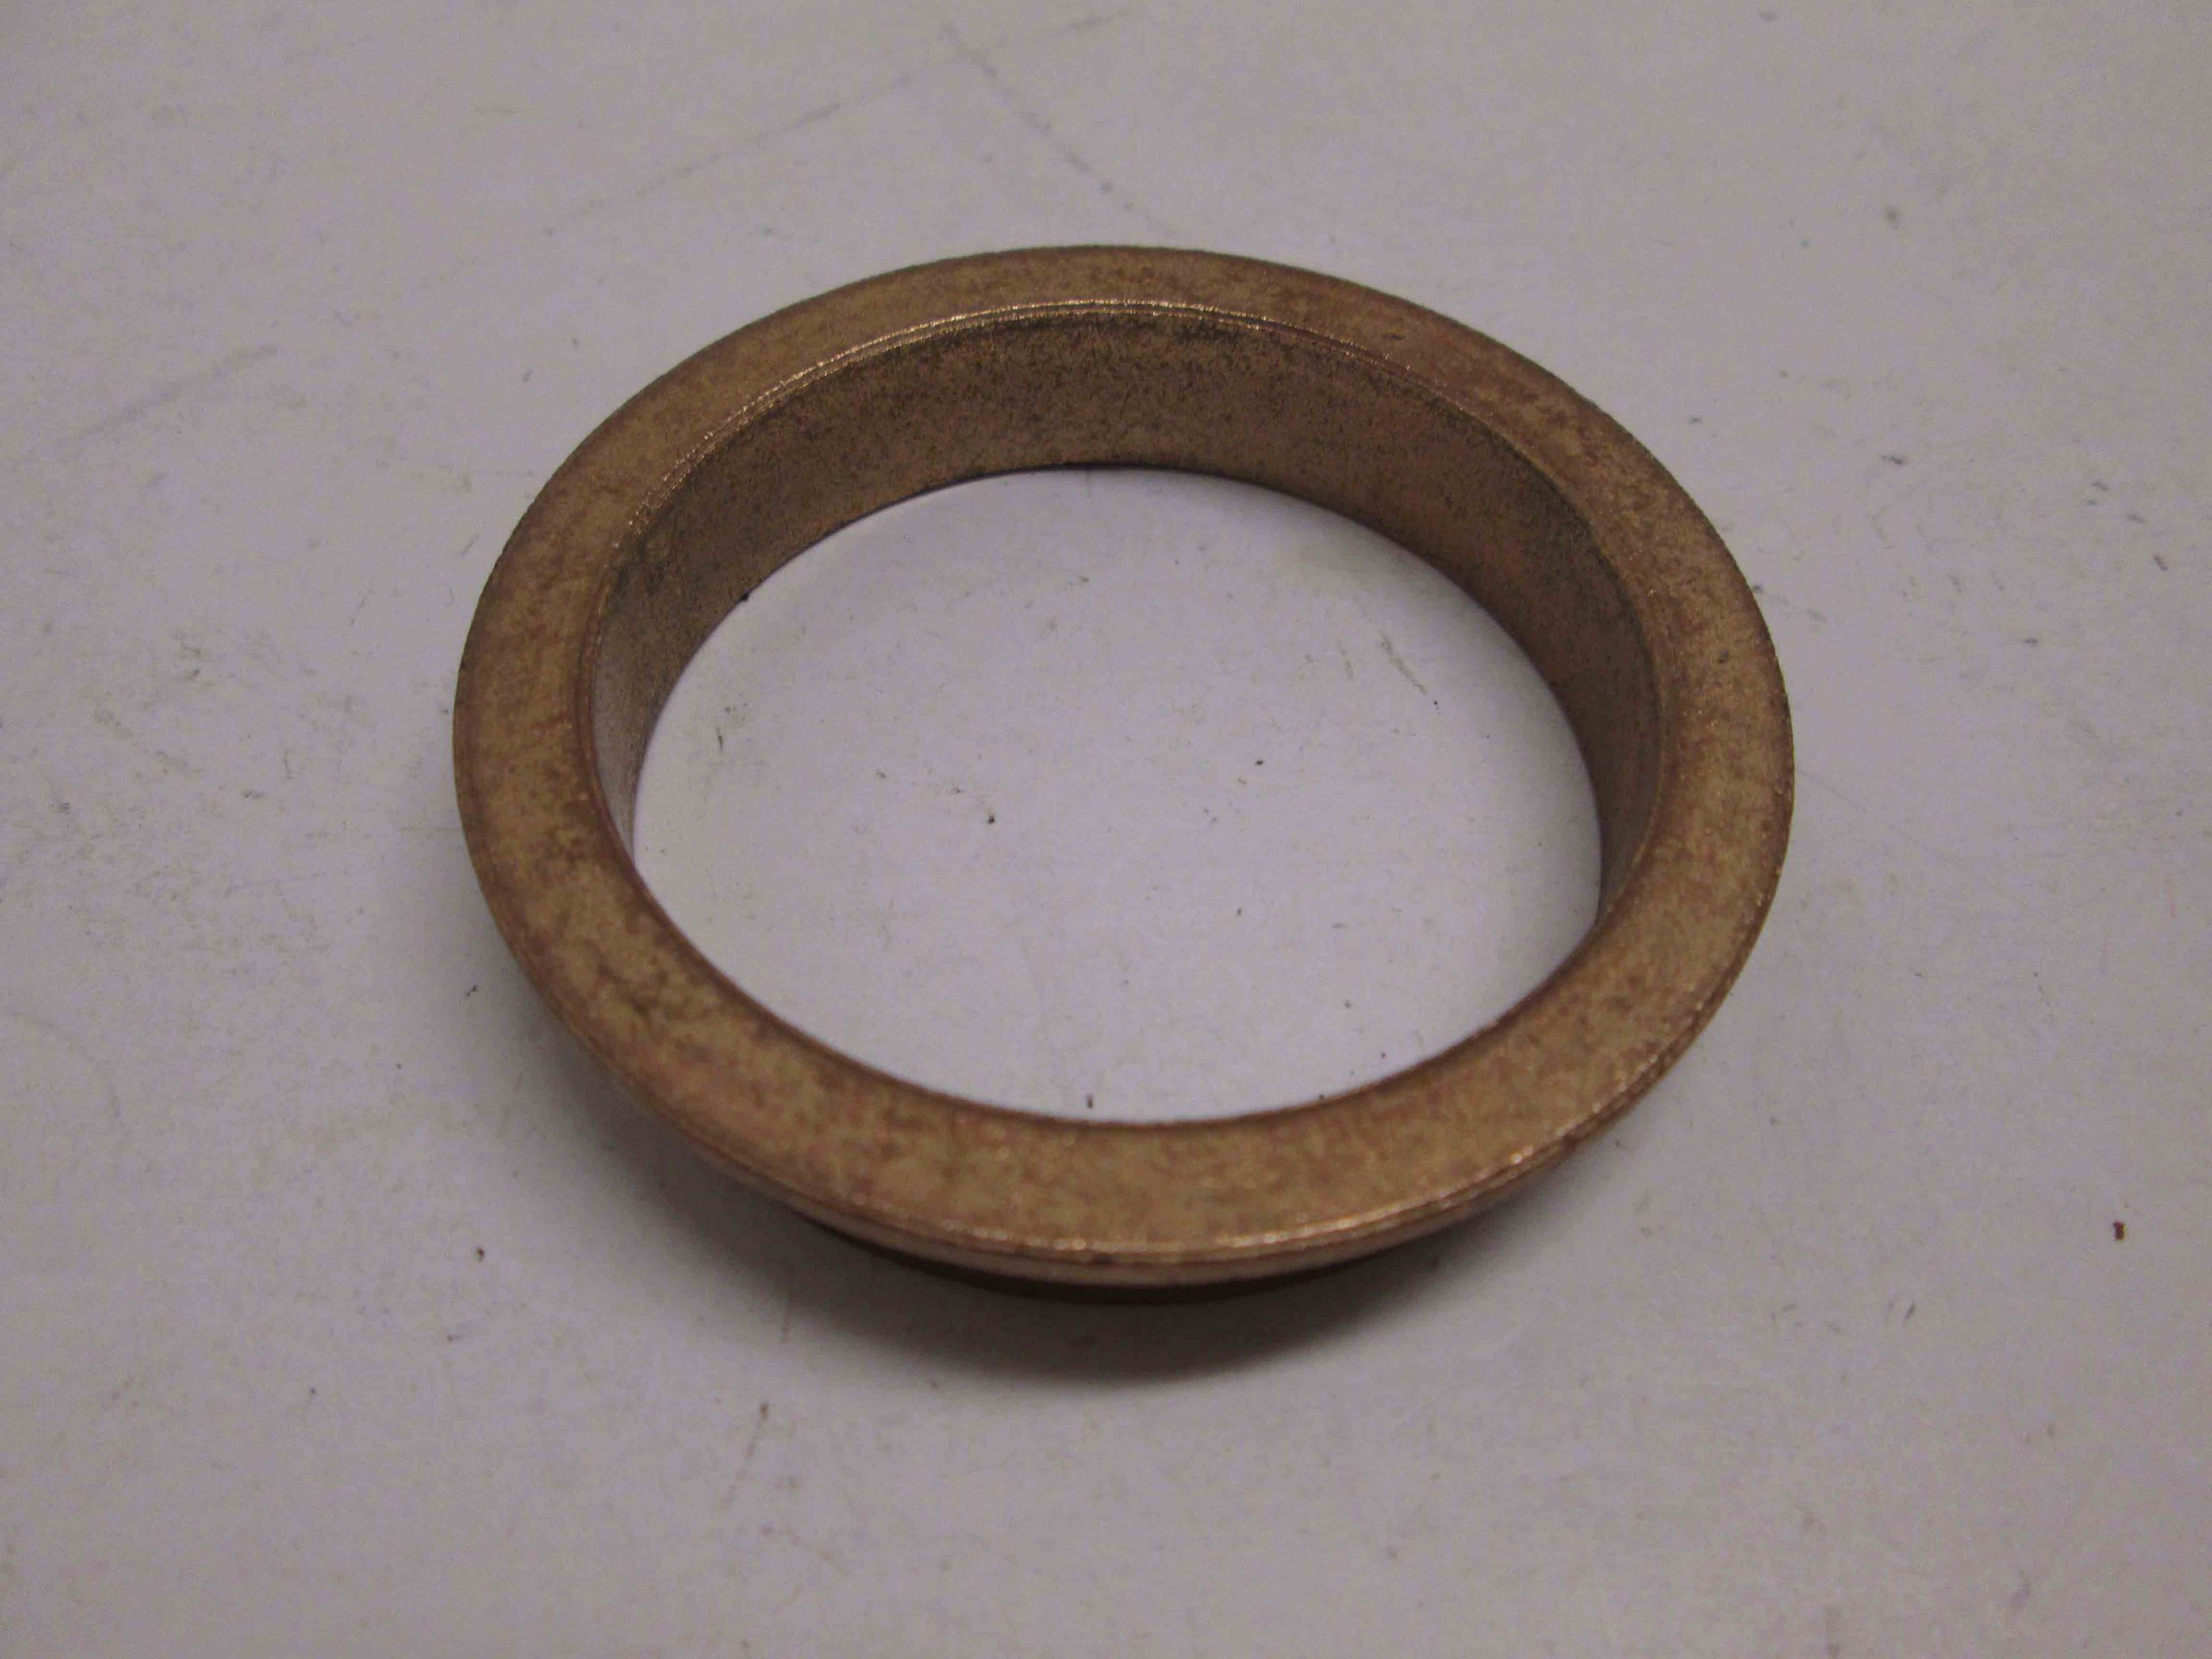 FLANGED OILITE BEARING